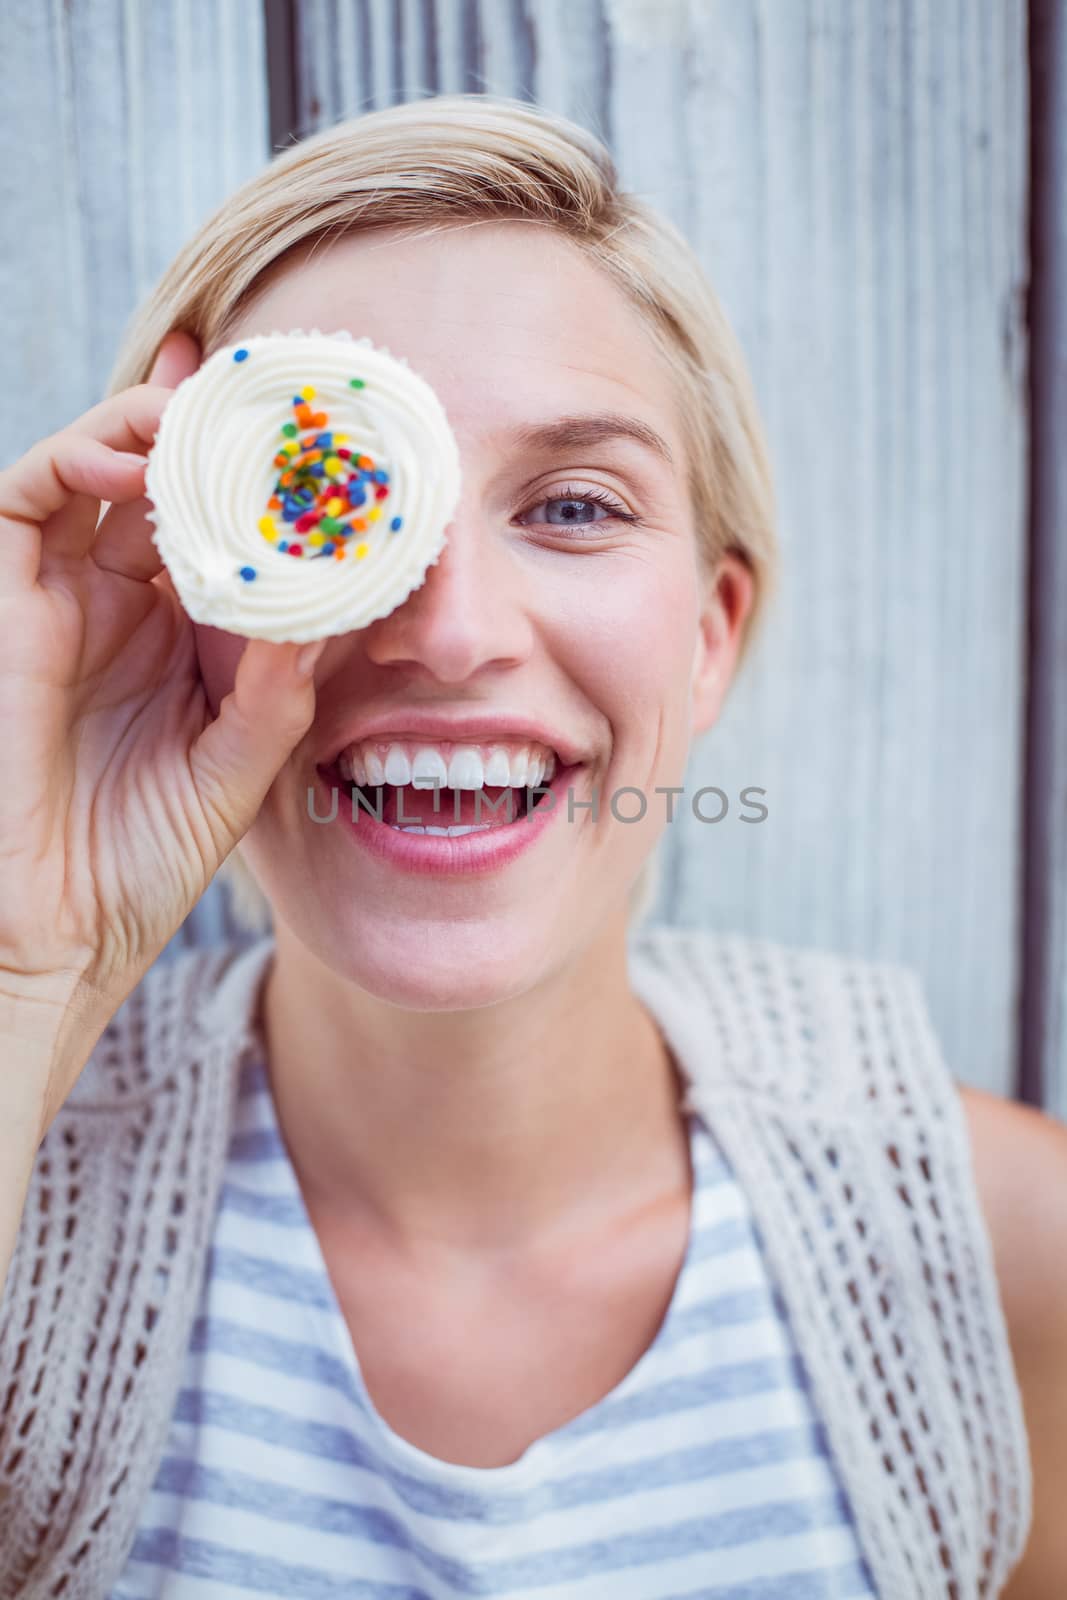 Pretty blonde woman grimacing with cupcake on wooden background